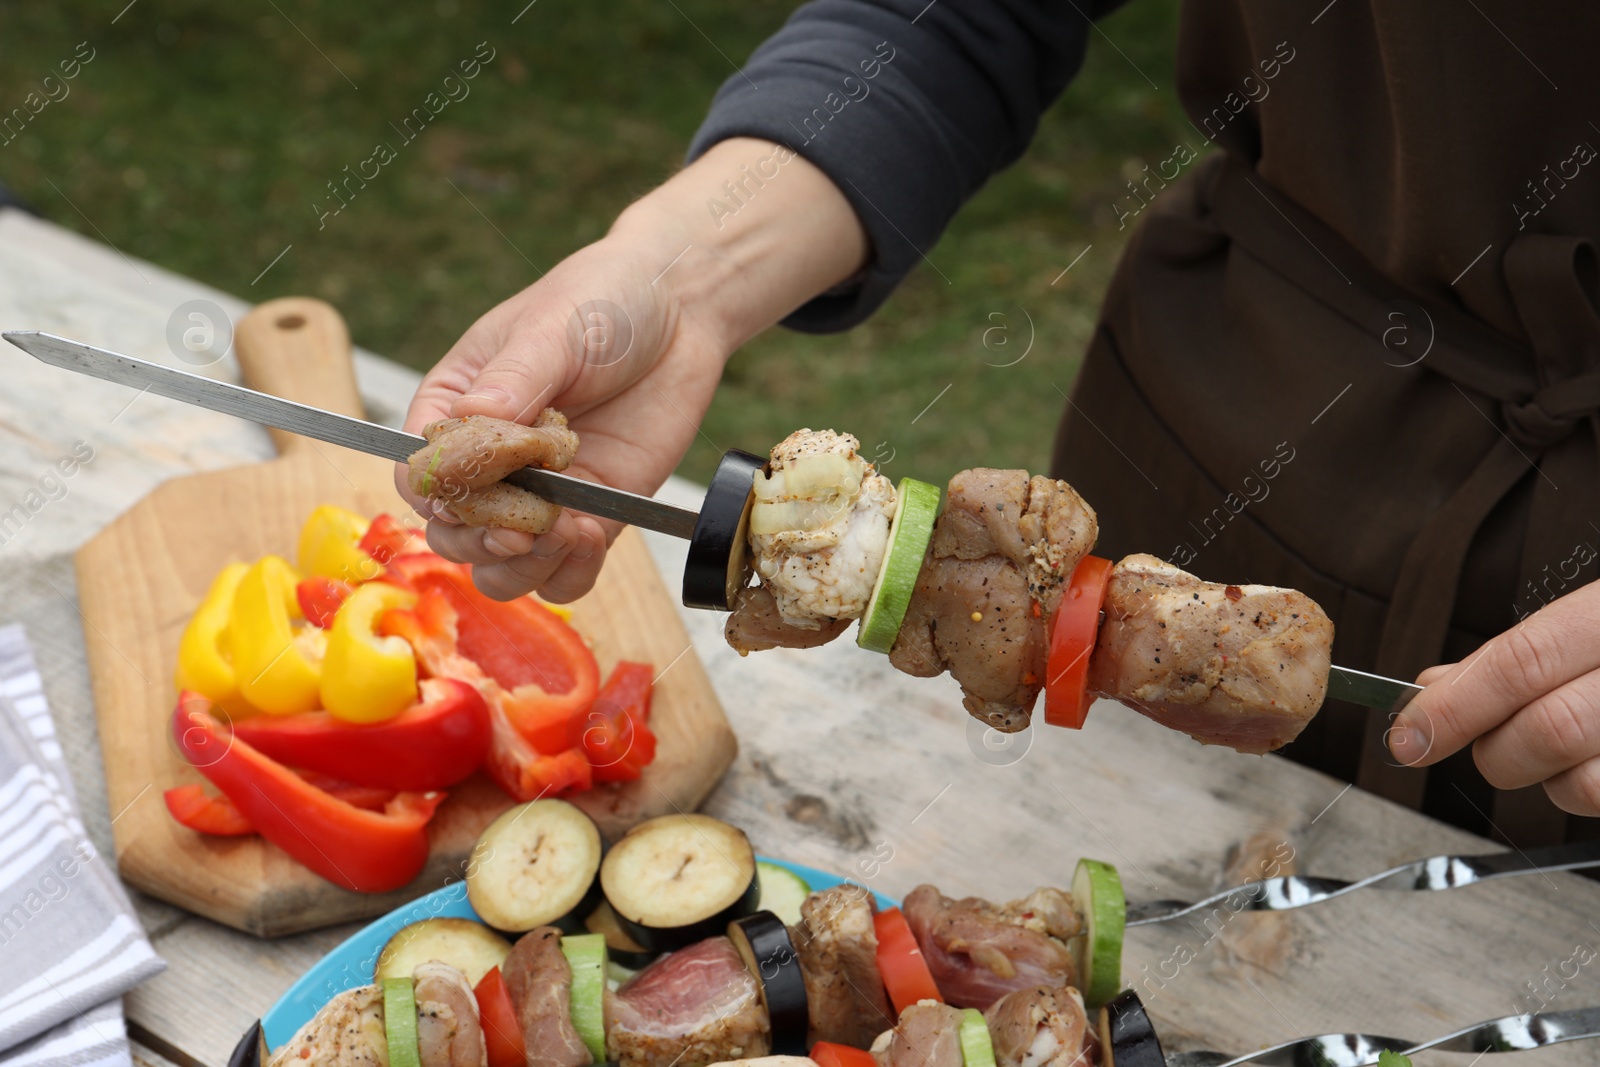 Photo of Woman stringing marinated meat and vegetables on skewer at wooden table outdoors, closeup